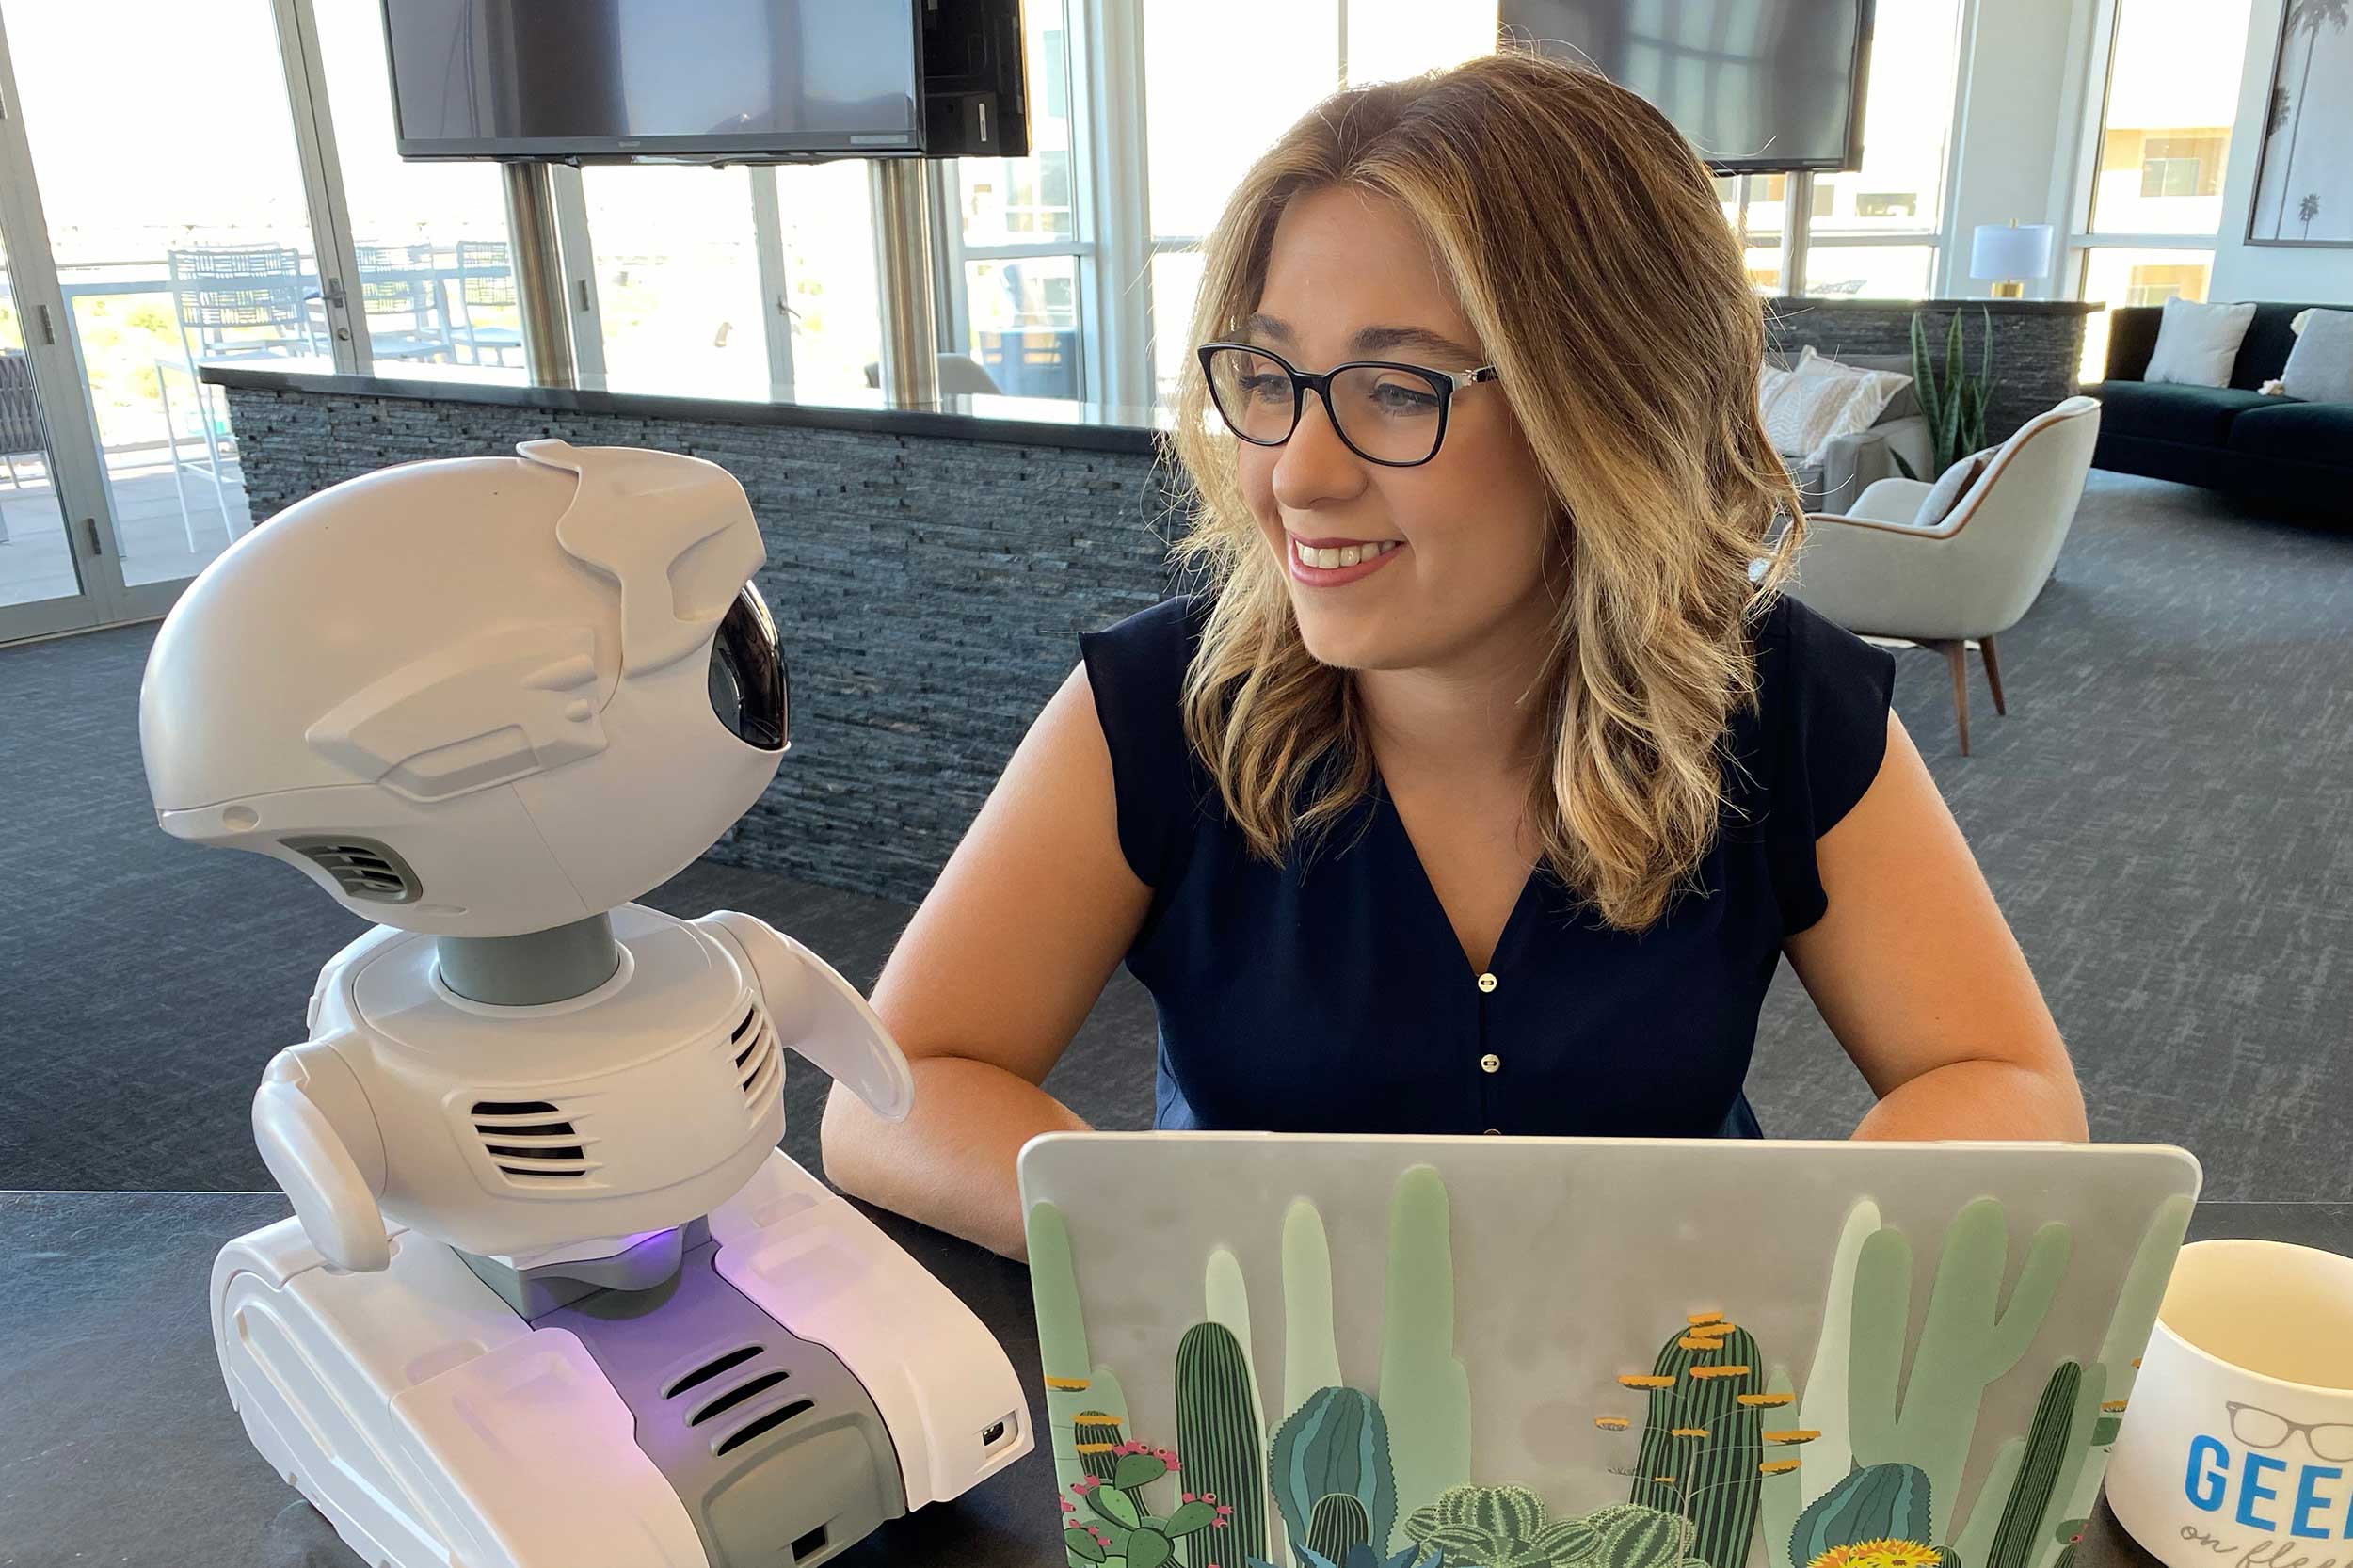 Female PhD student student Jordan Miller works at a laptop, smiling towards a small white robot sitting next to her.